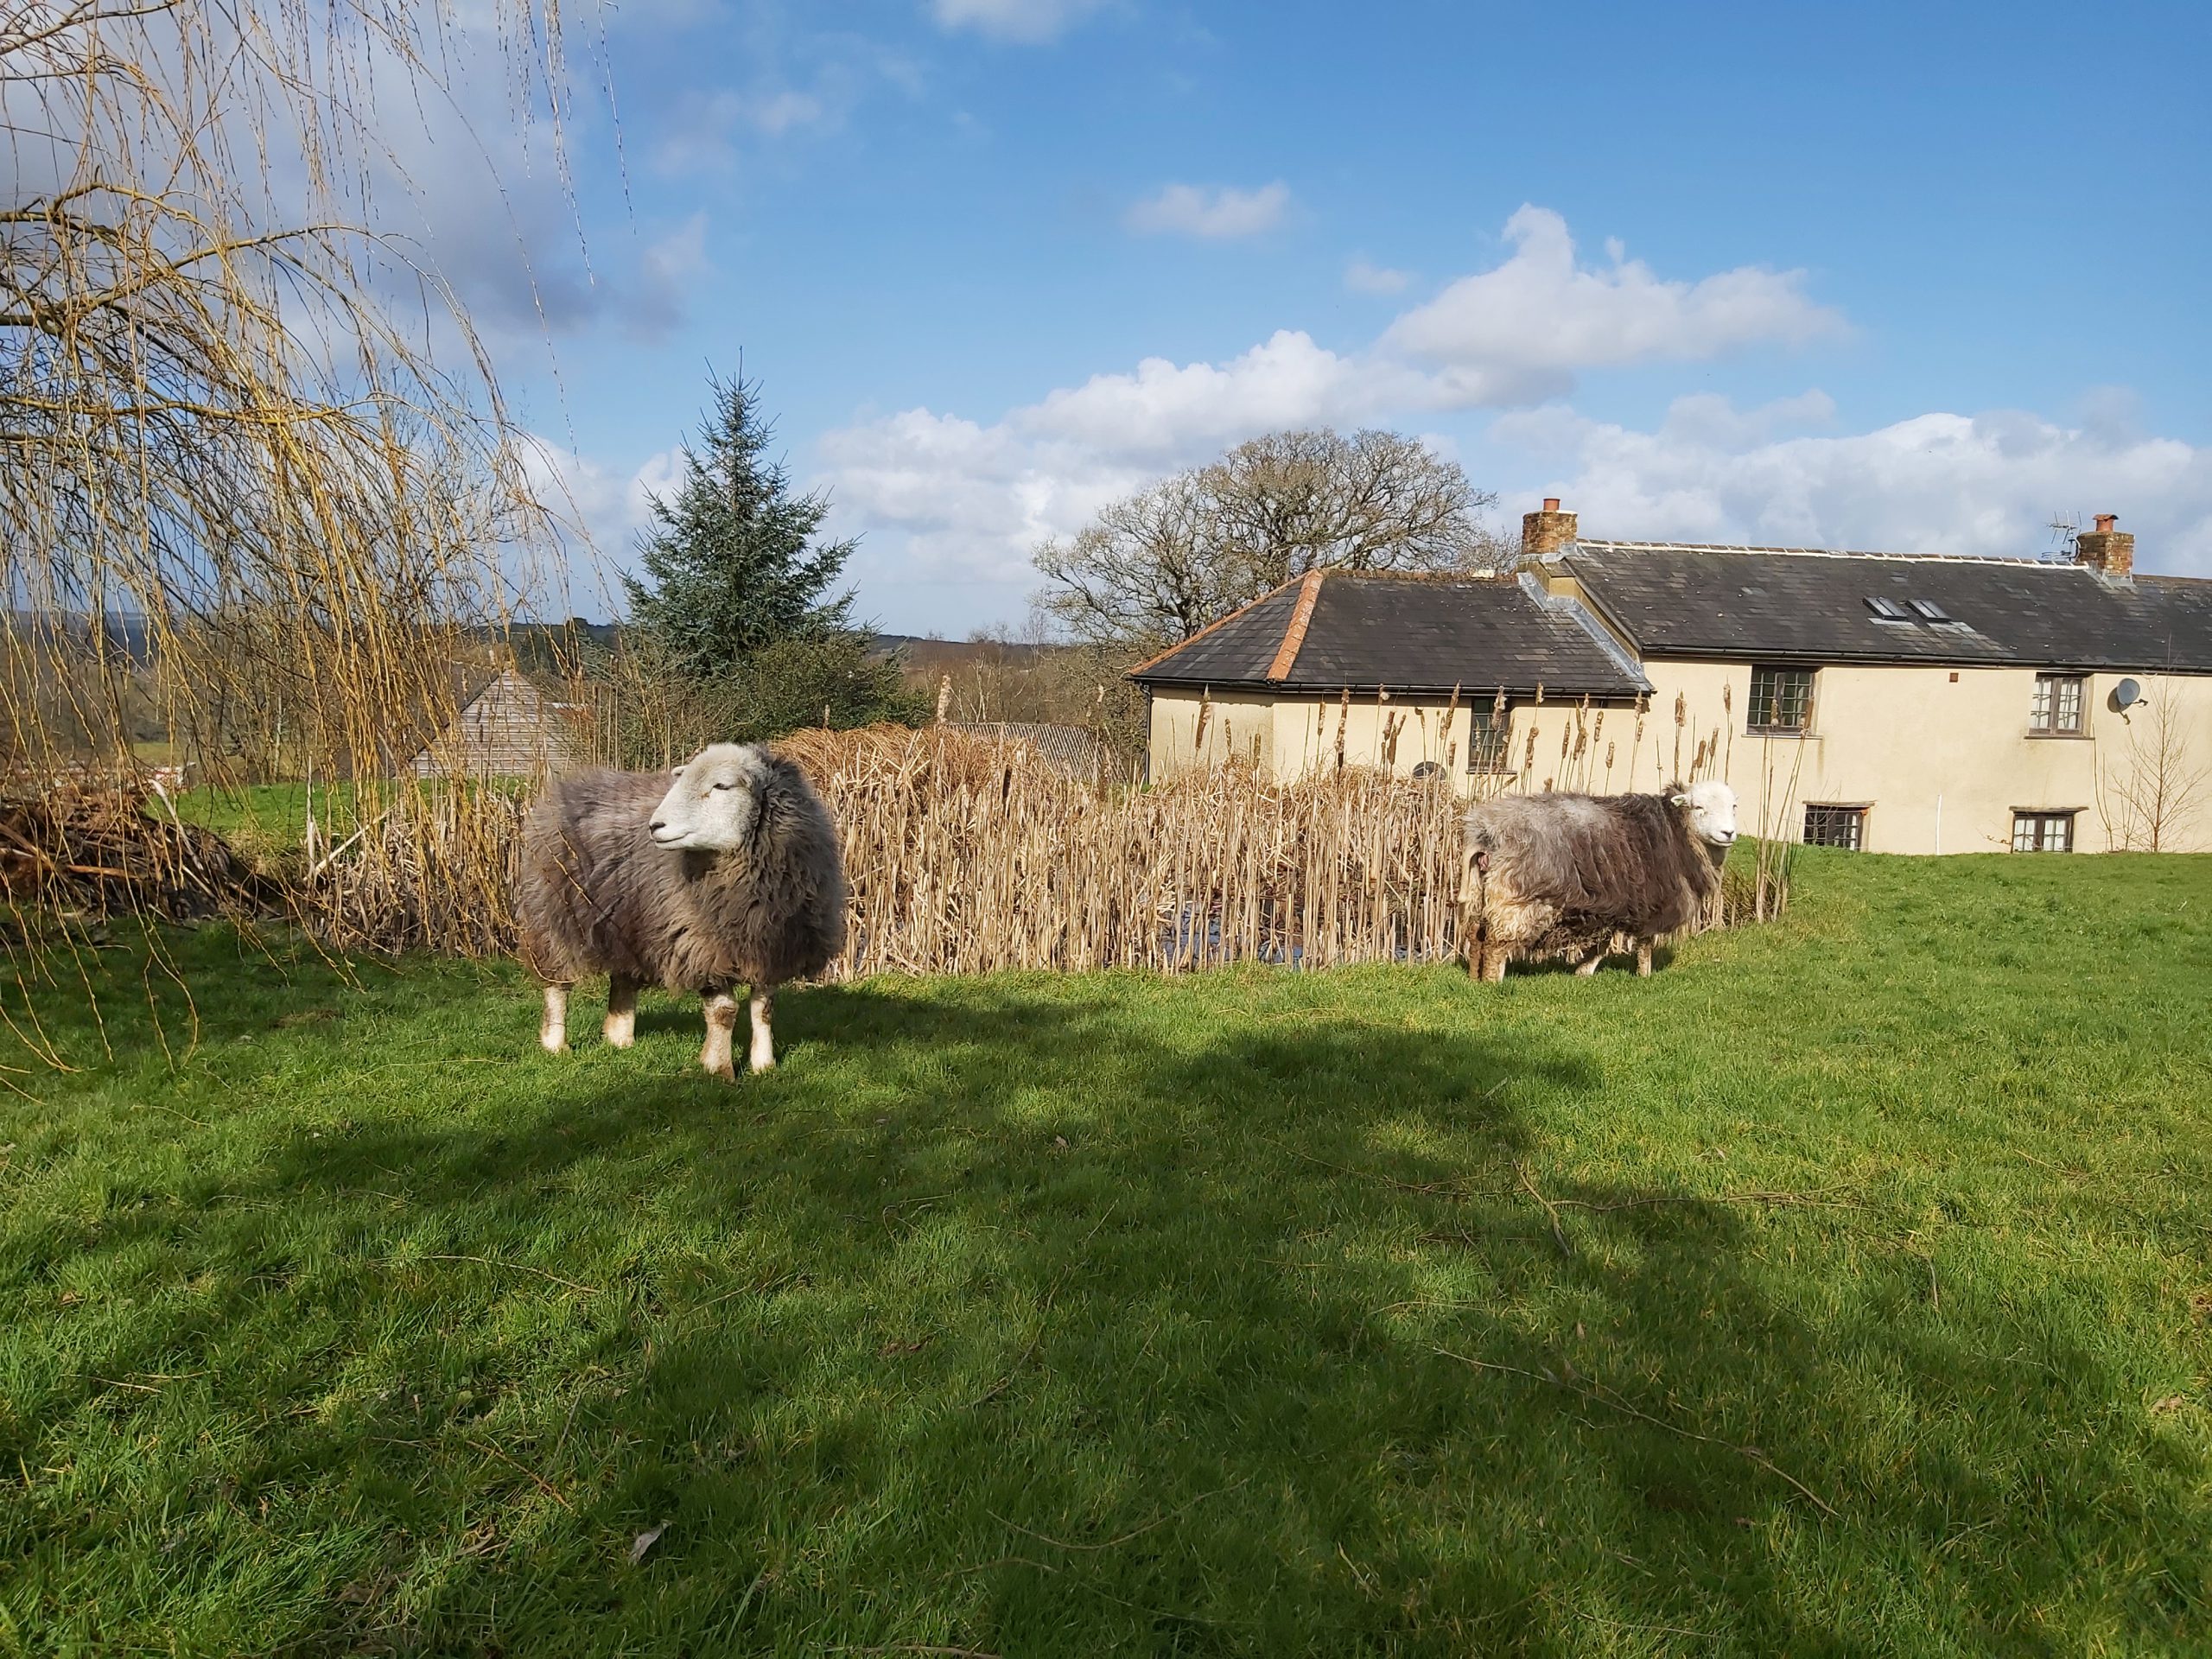 Herdwick Sheep by the pond